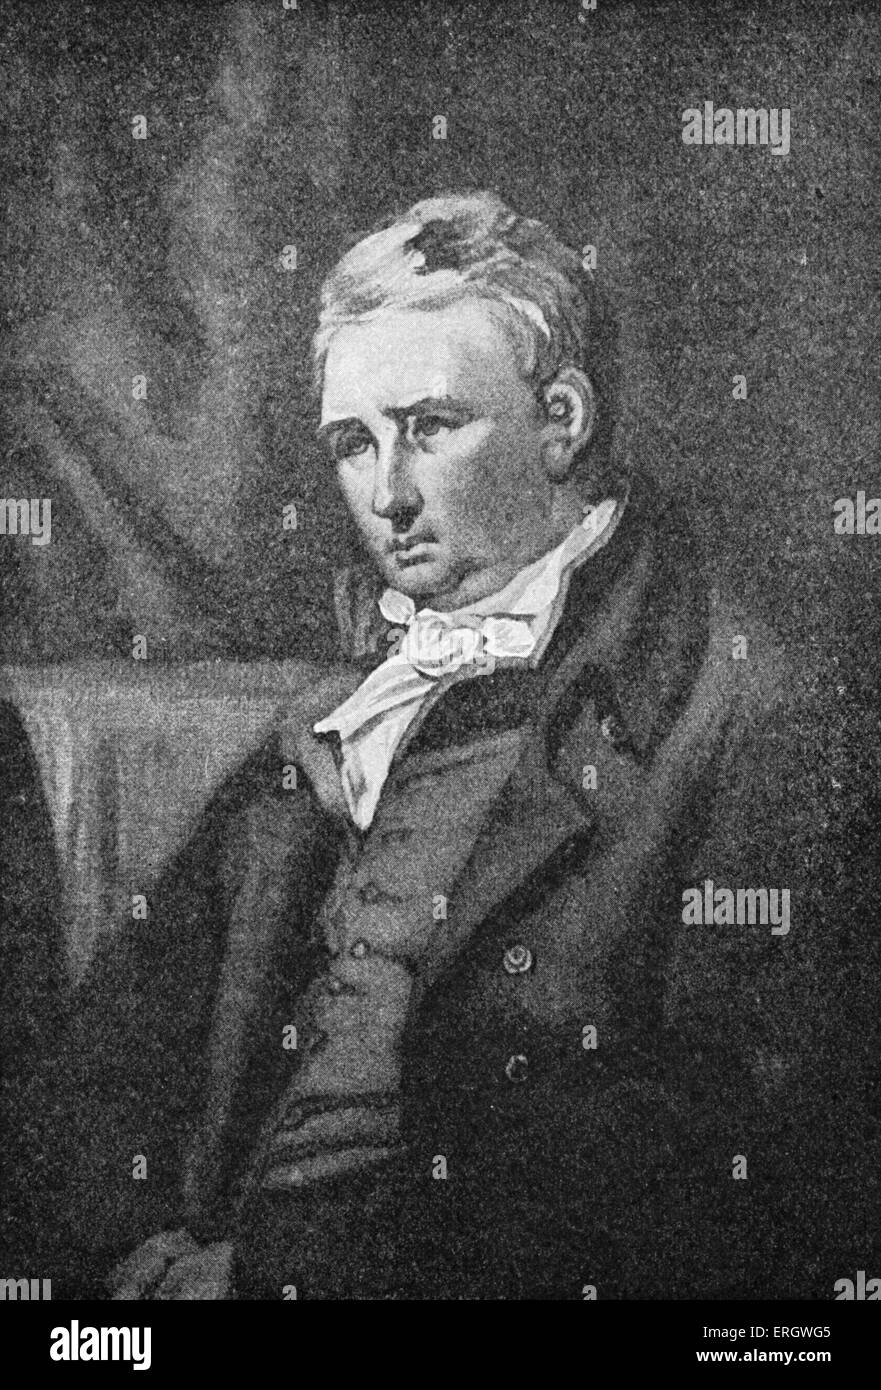 William Cobbett: English writer and journalist, 9 March 1763 – 18 June 1835. Engraving by Willliam Ward. Stock Photo